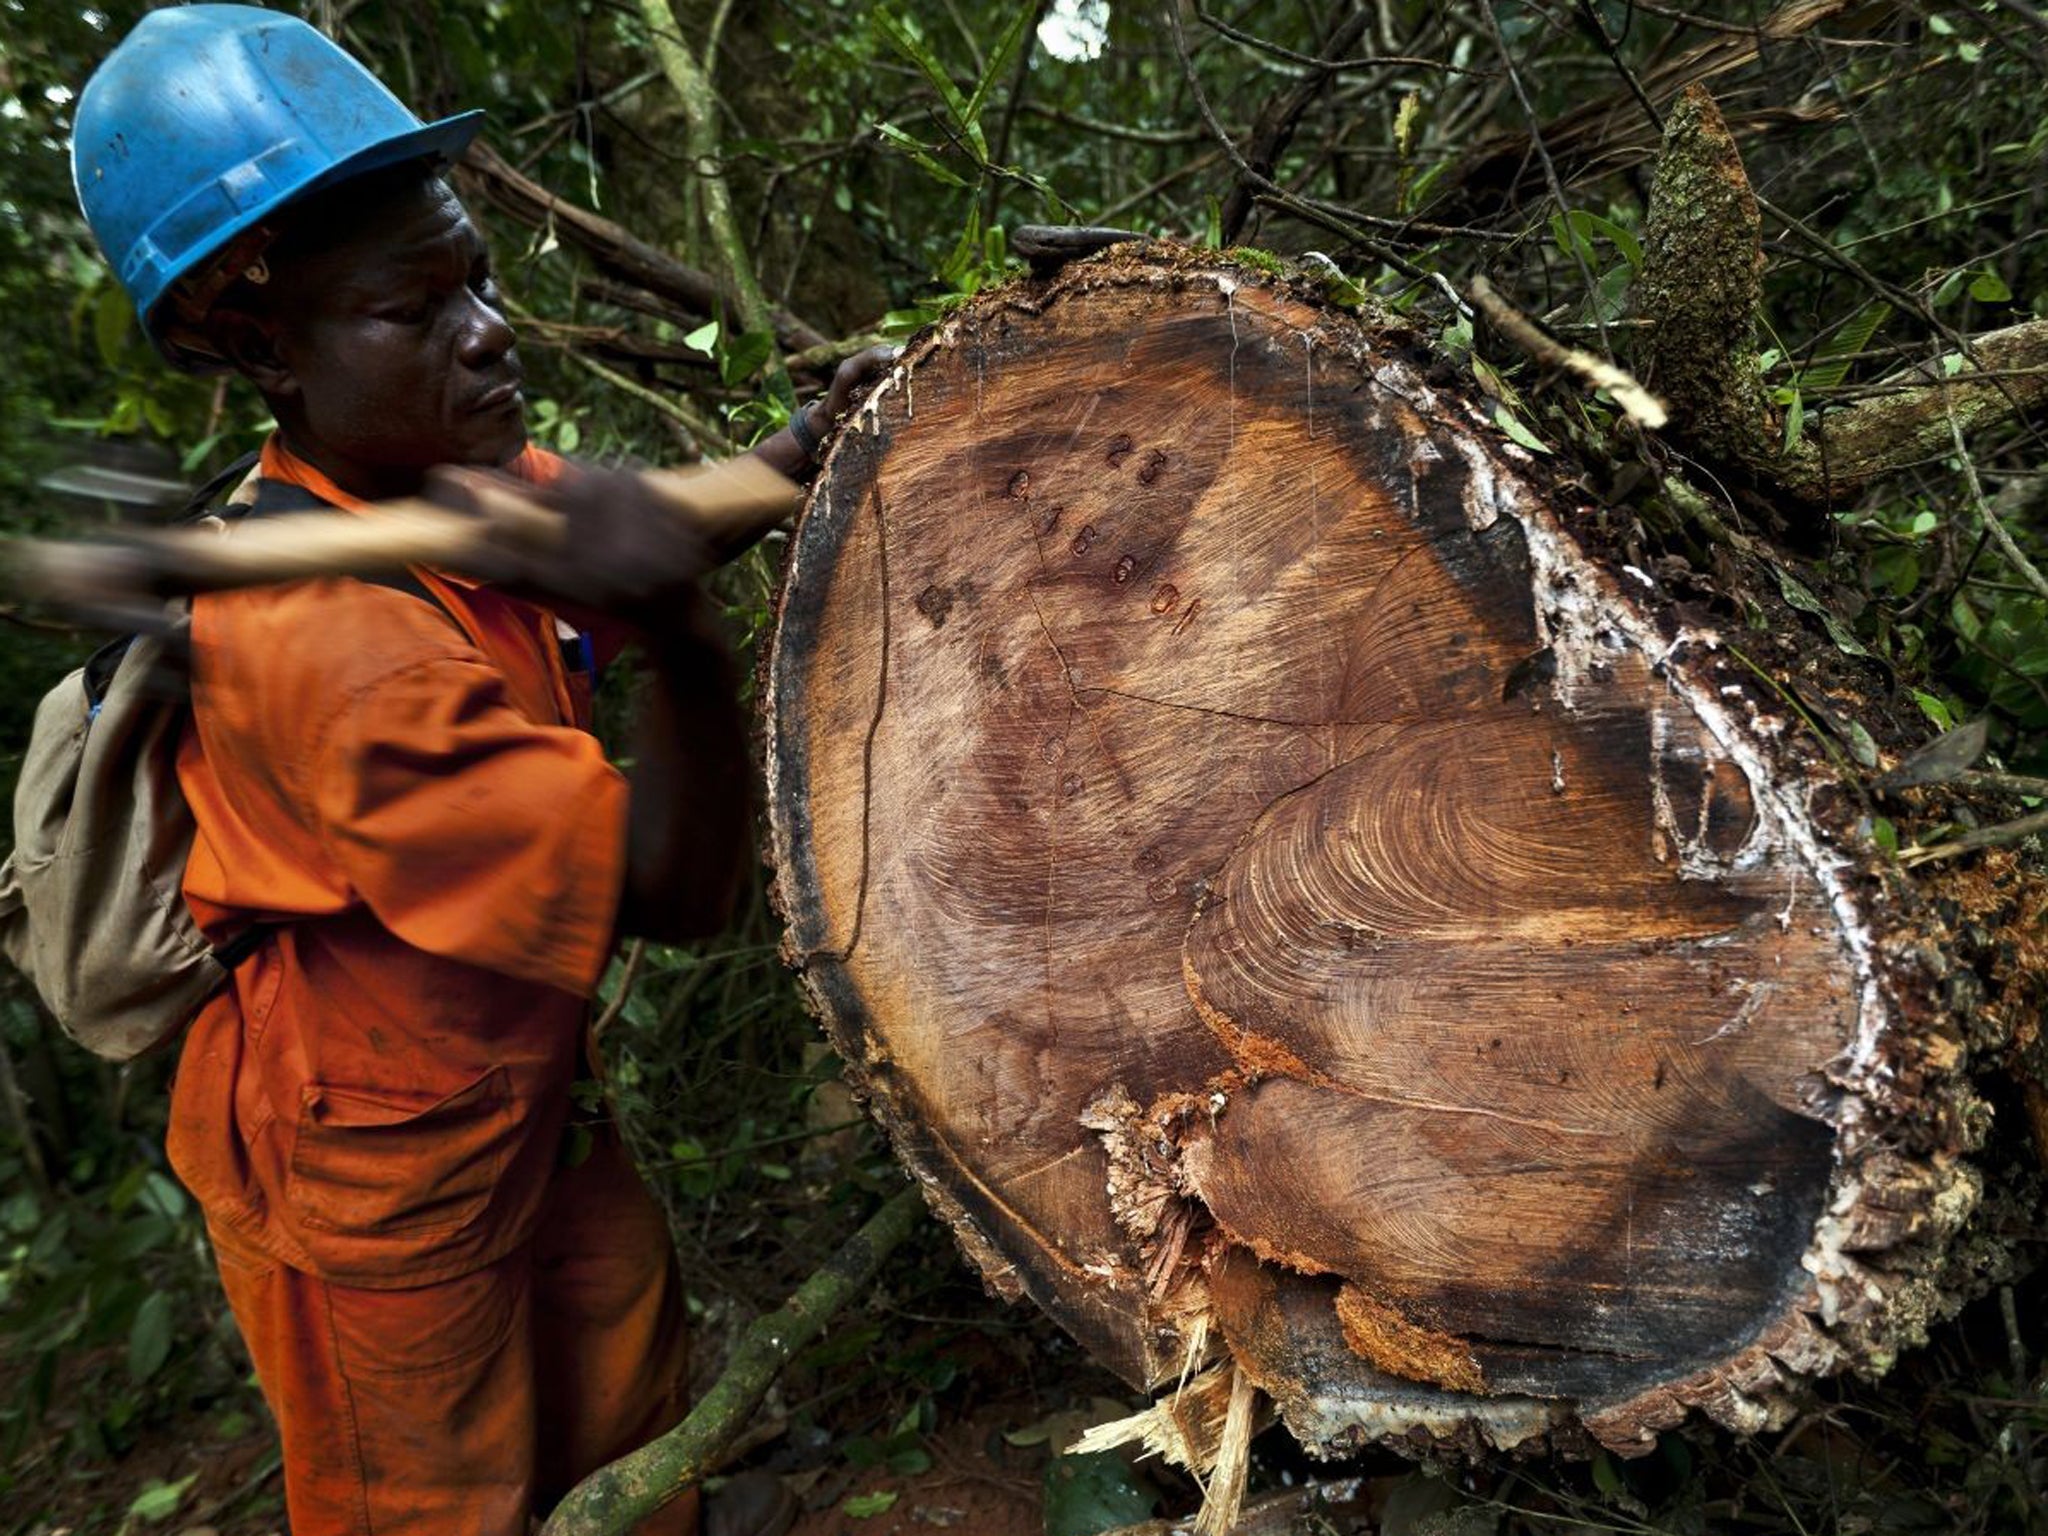 The world's timber trade has been touted as one of the investments of the future and attracted £4bn-worth of funds in the UK alone – but similar promotions have ended in disaster